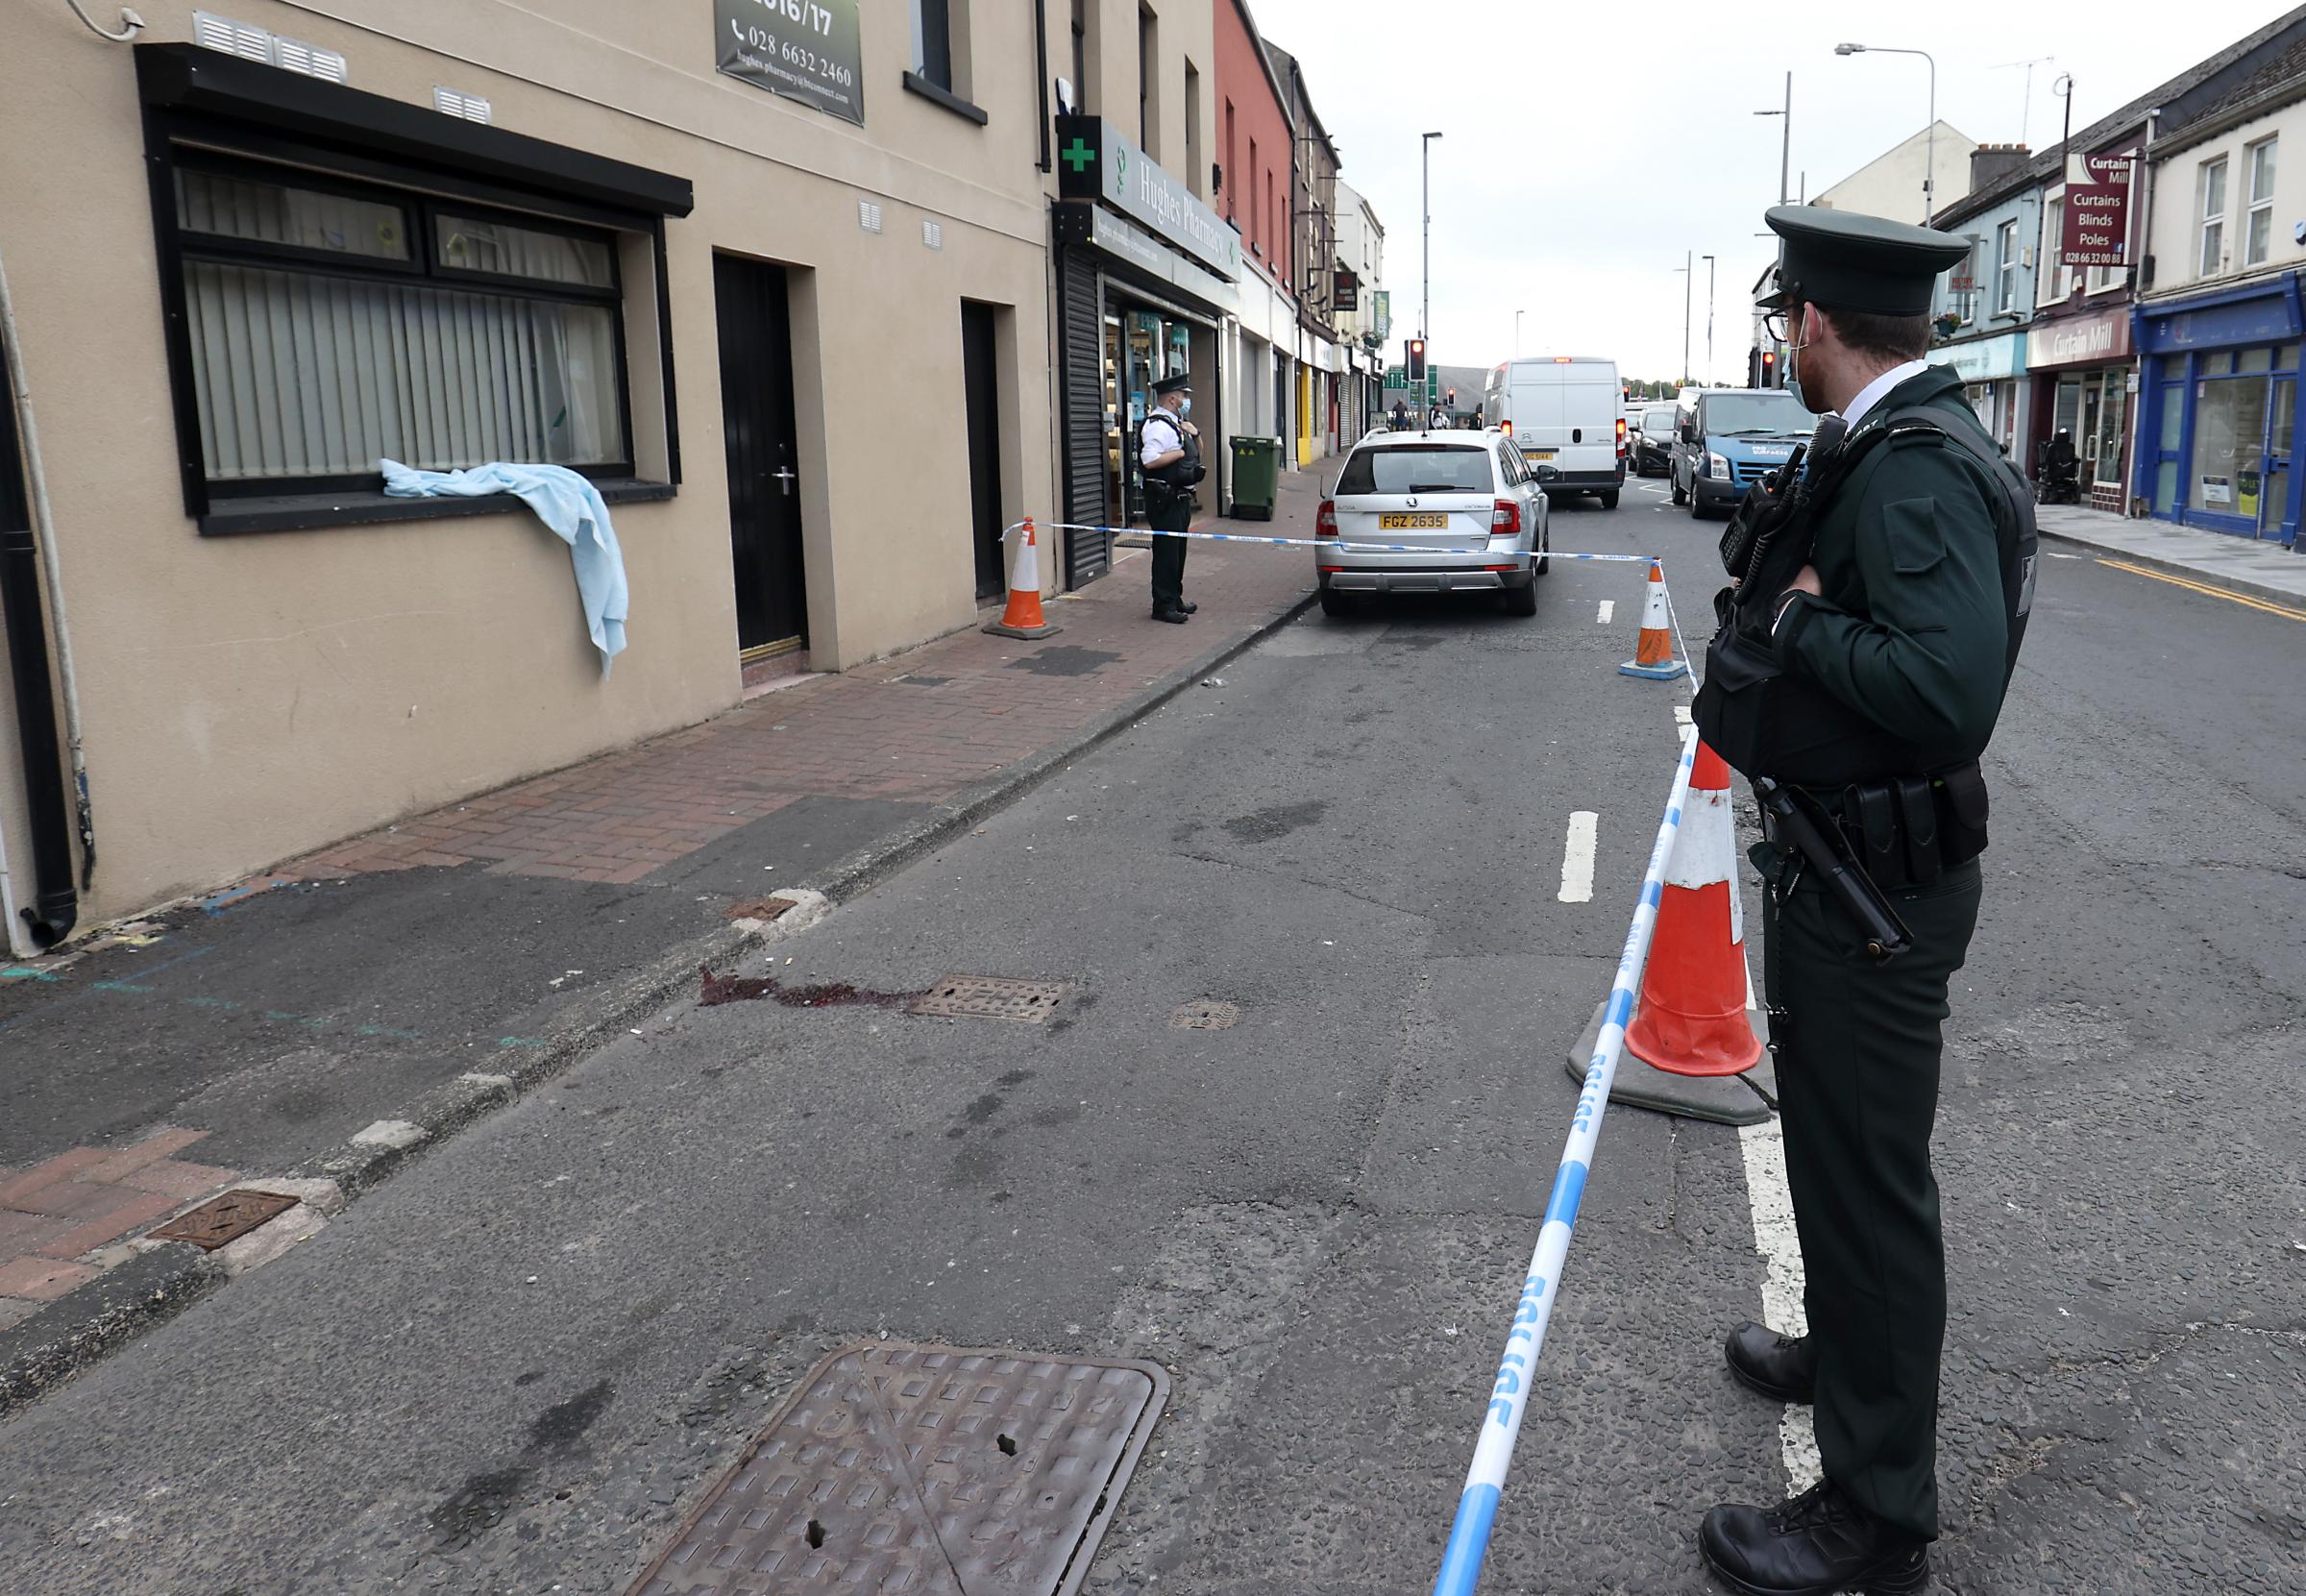 PSNI appealing for witnesses following assault in Fermanagh